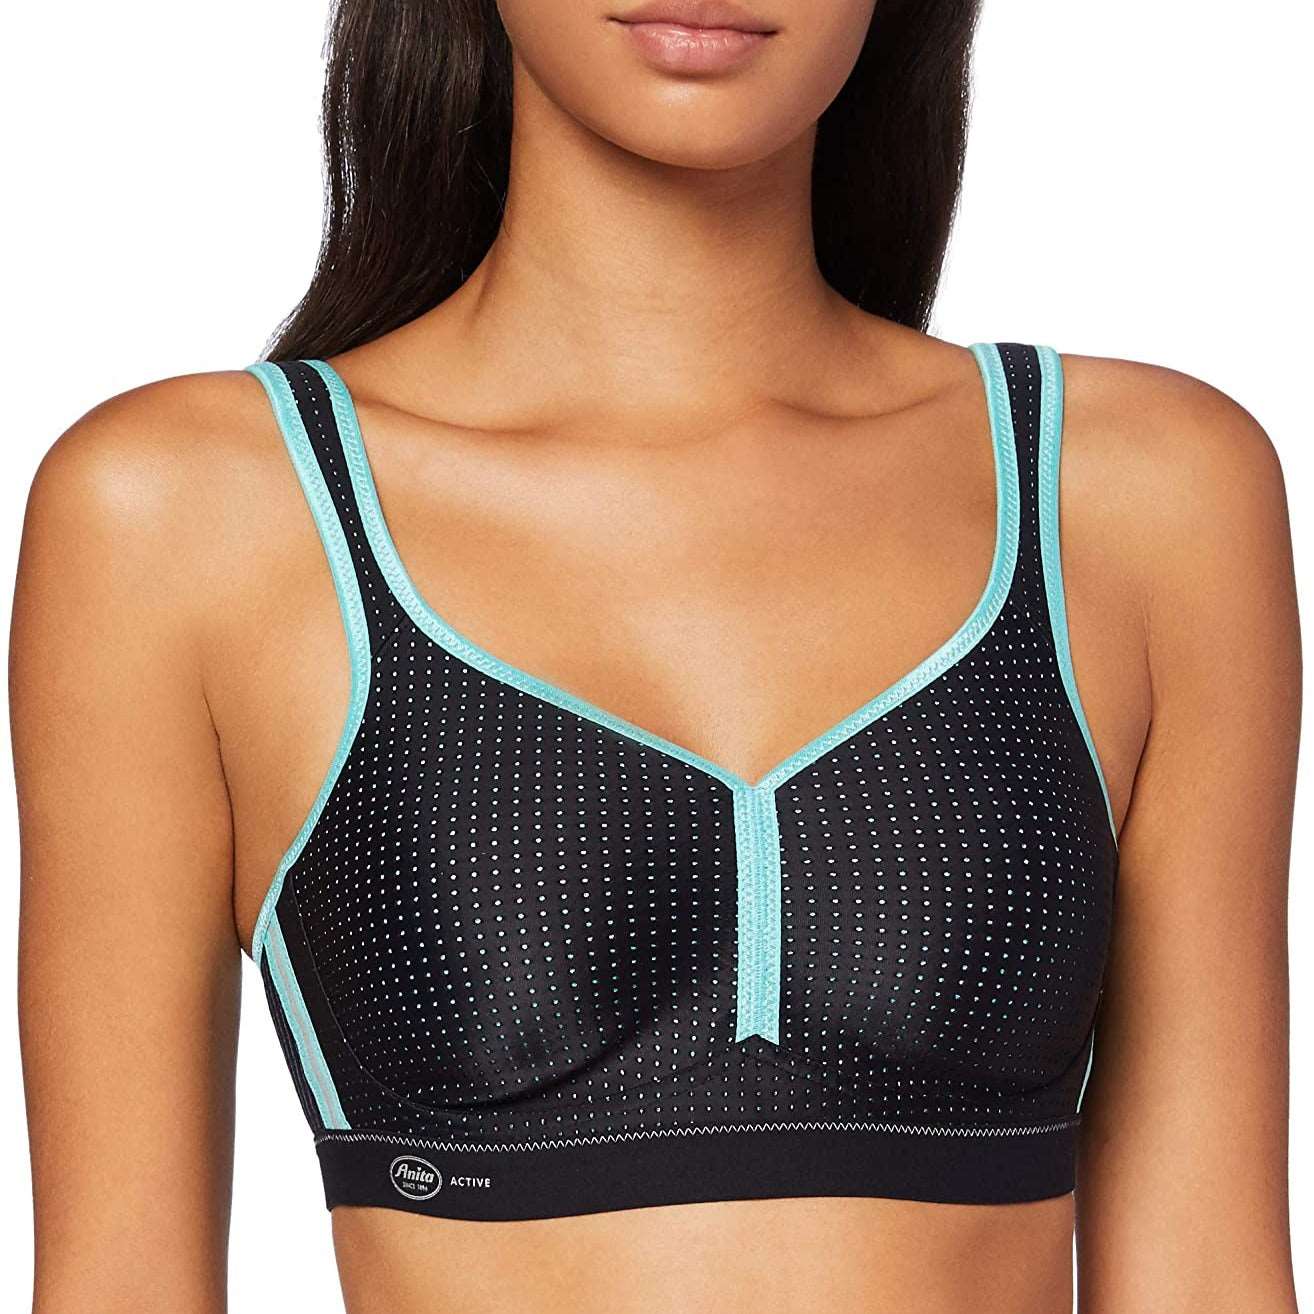 Anita USA on Instagram: Our PanAlp™️ Air Sports Bra Style is now available  in the new Henna Fiesta colorway! #AnitaActive #PanAlp #SportsBra #5560  #HennaFiesta #women #workout #fitness #outdoor #active #sports #gym  #running #